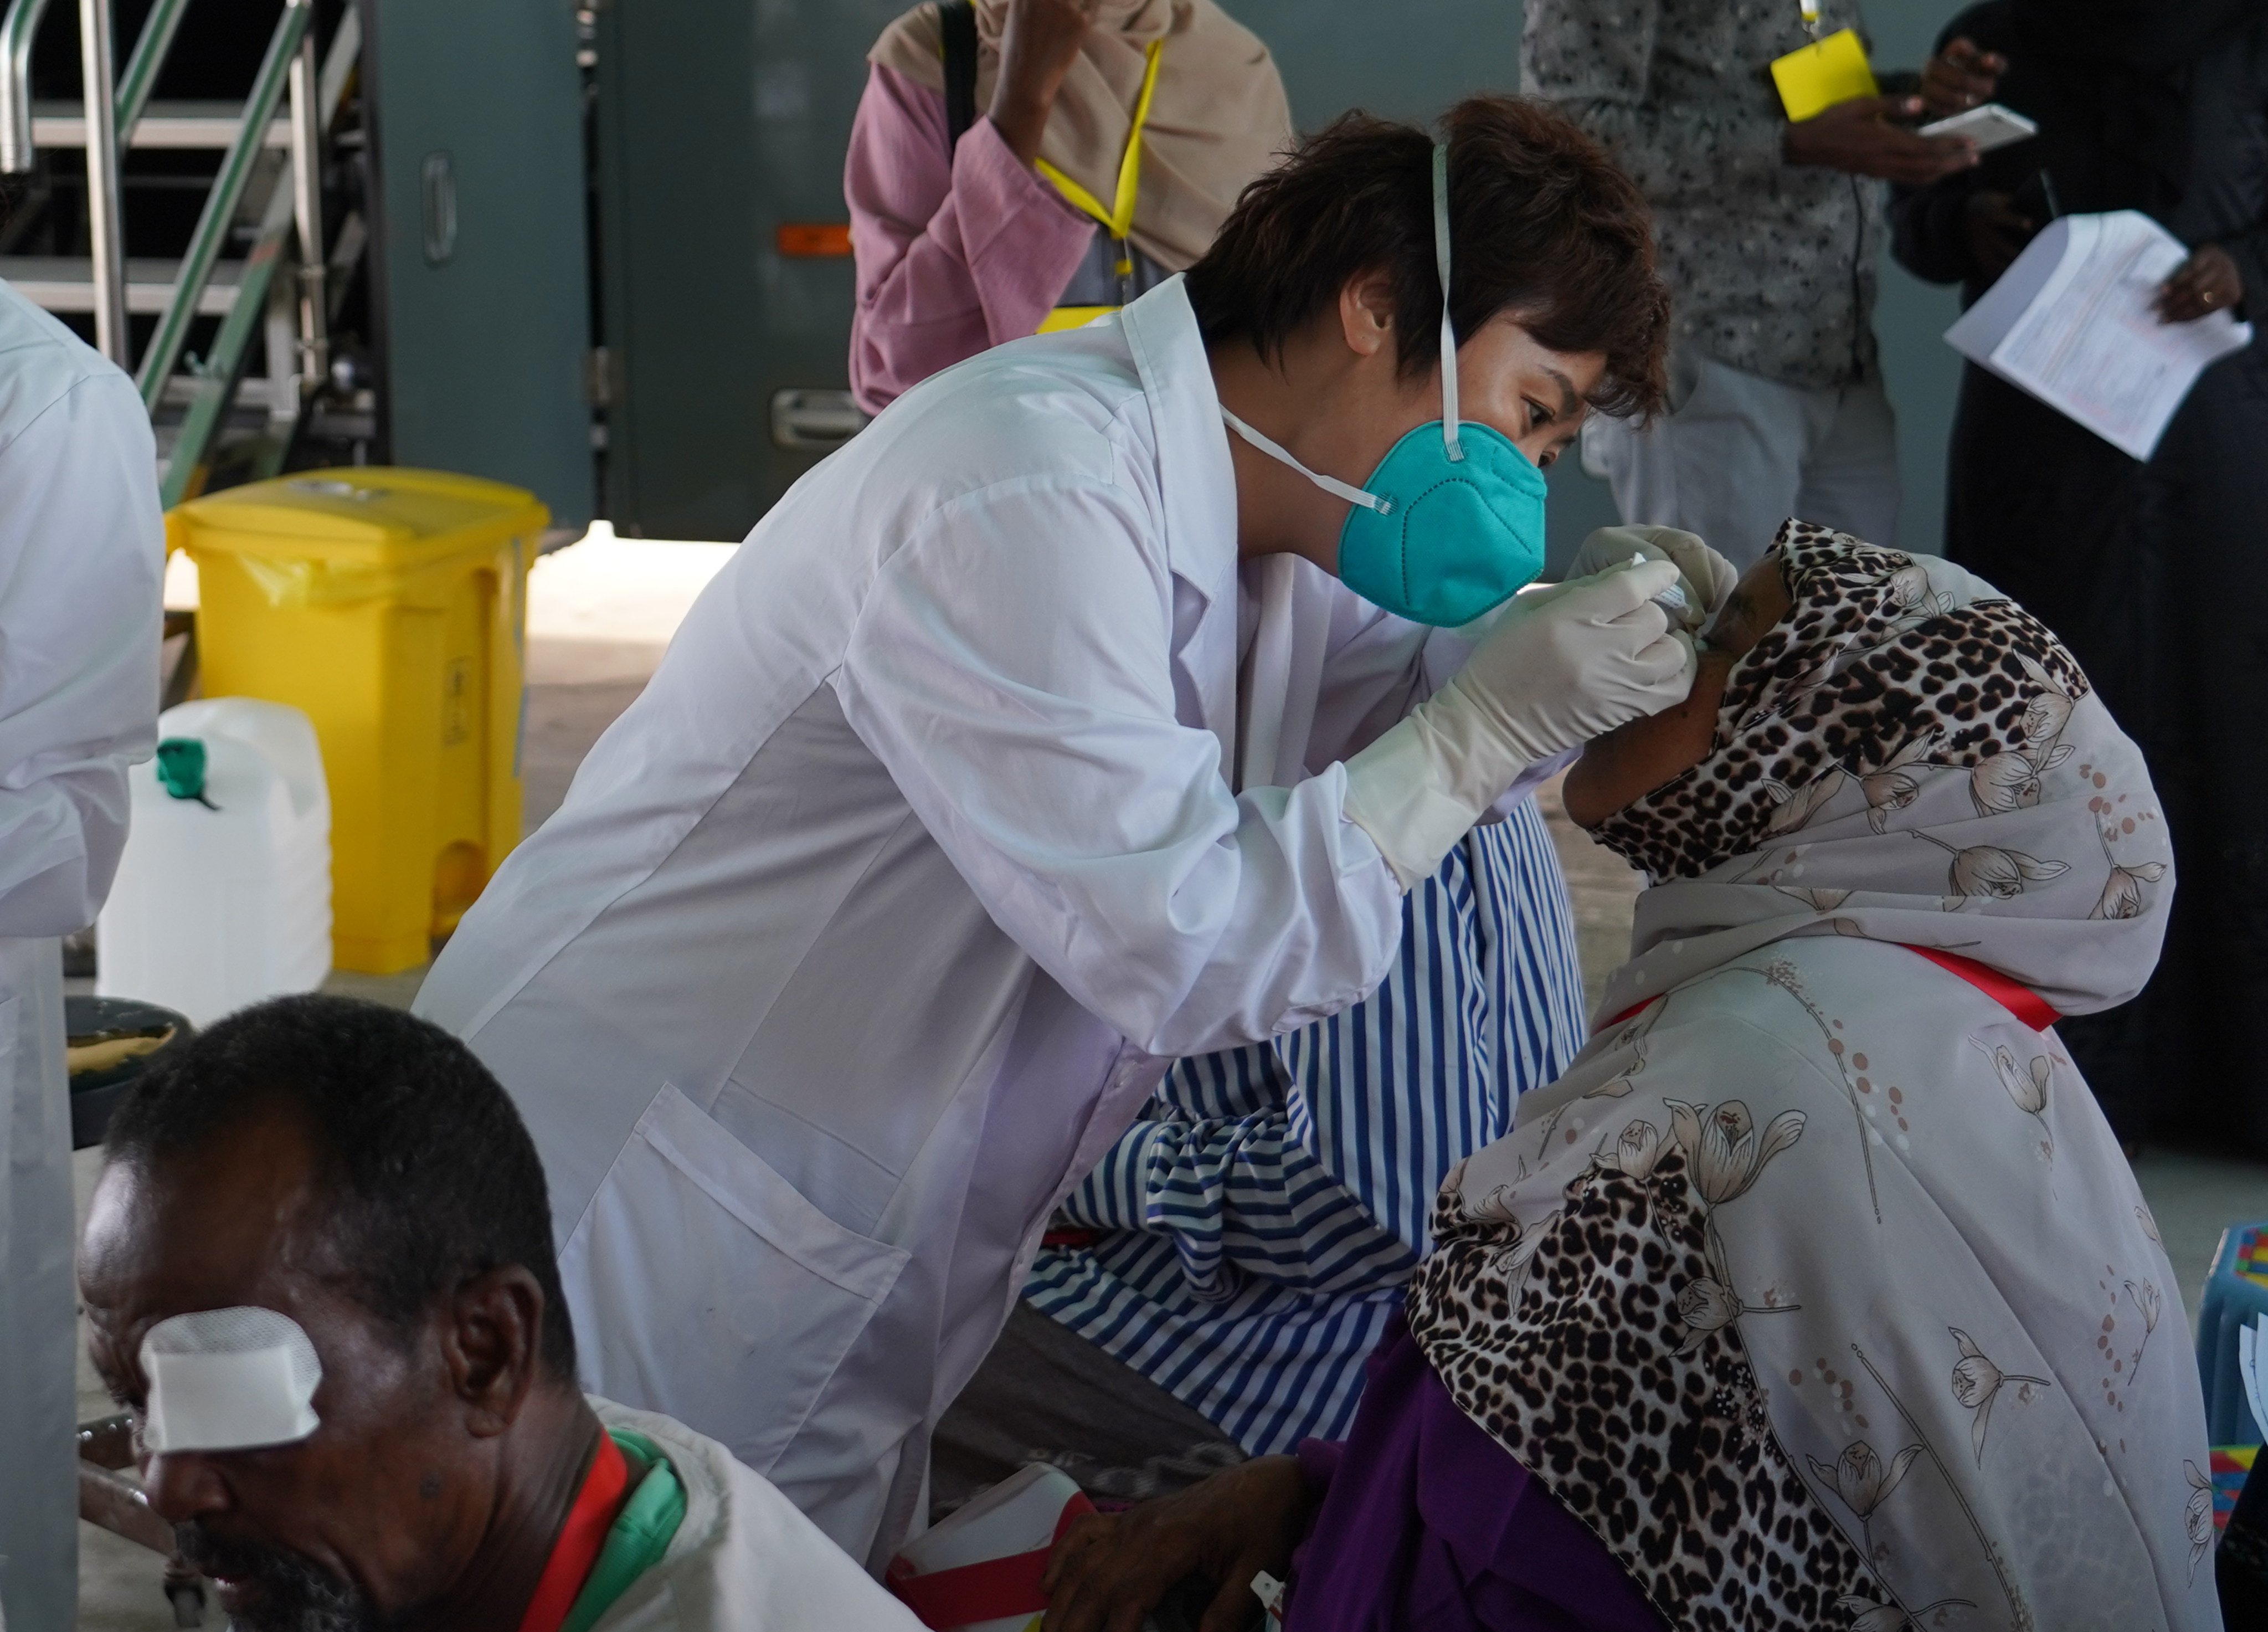 A doctor working with GX Foundation performs a cataract operation at a mobile surgery centre parked in Djibouti City in March. Photo: Handout